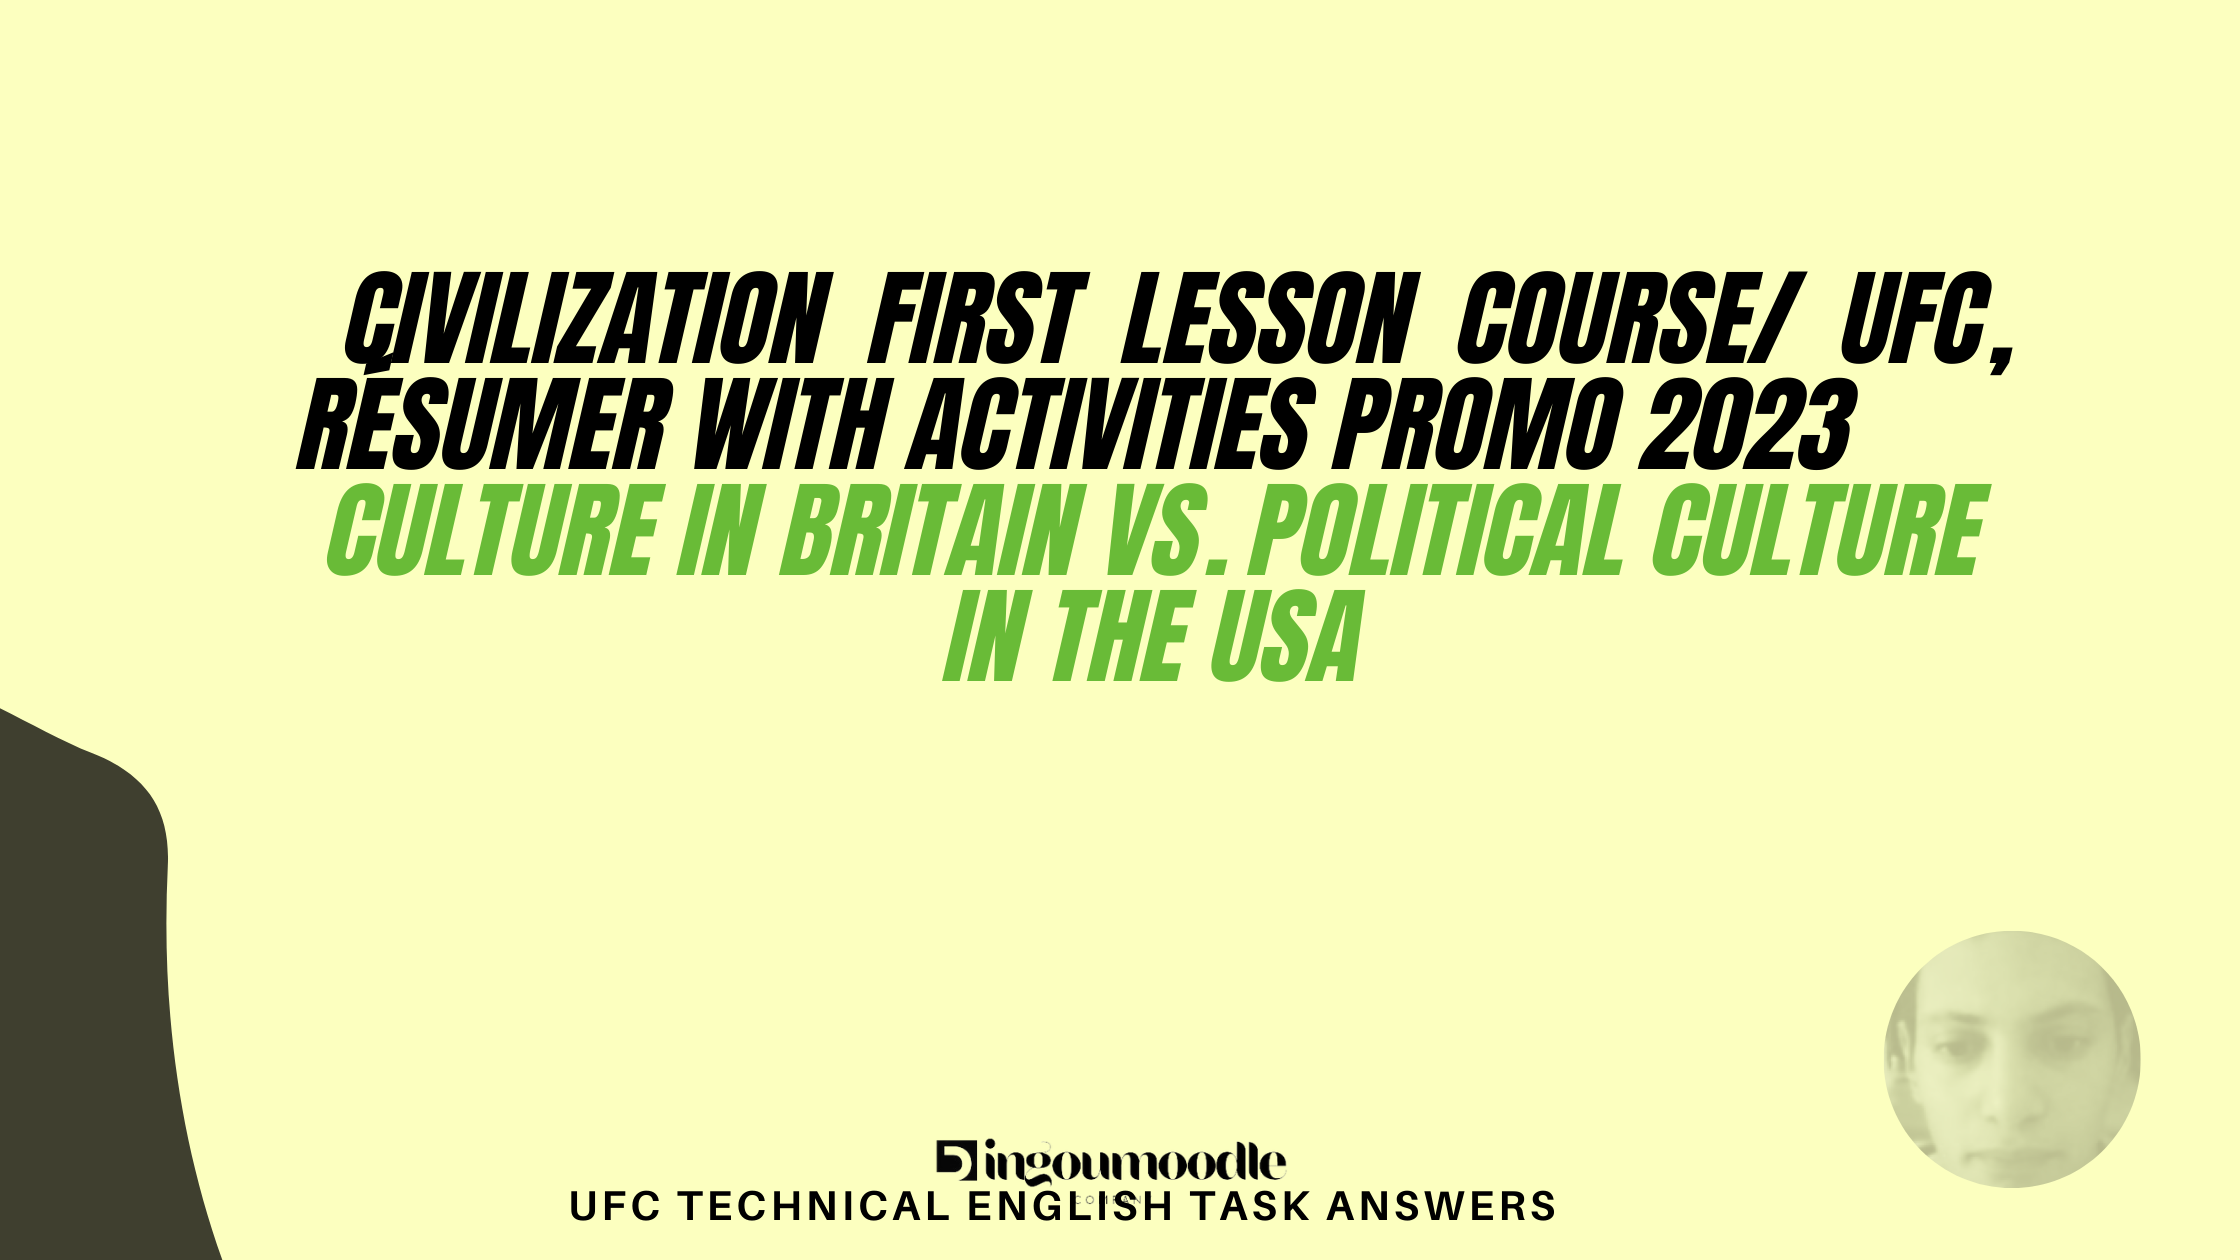 Civilization First lesson course/ UFC, résumer with activities promo 2023(culture in Britain vs Political Culture in the US